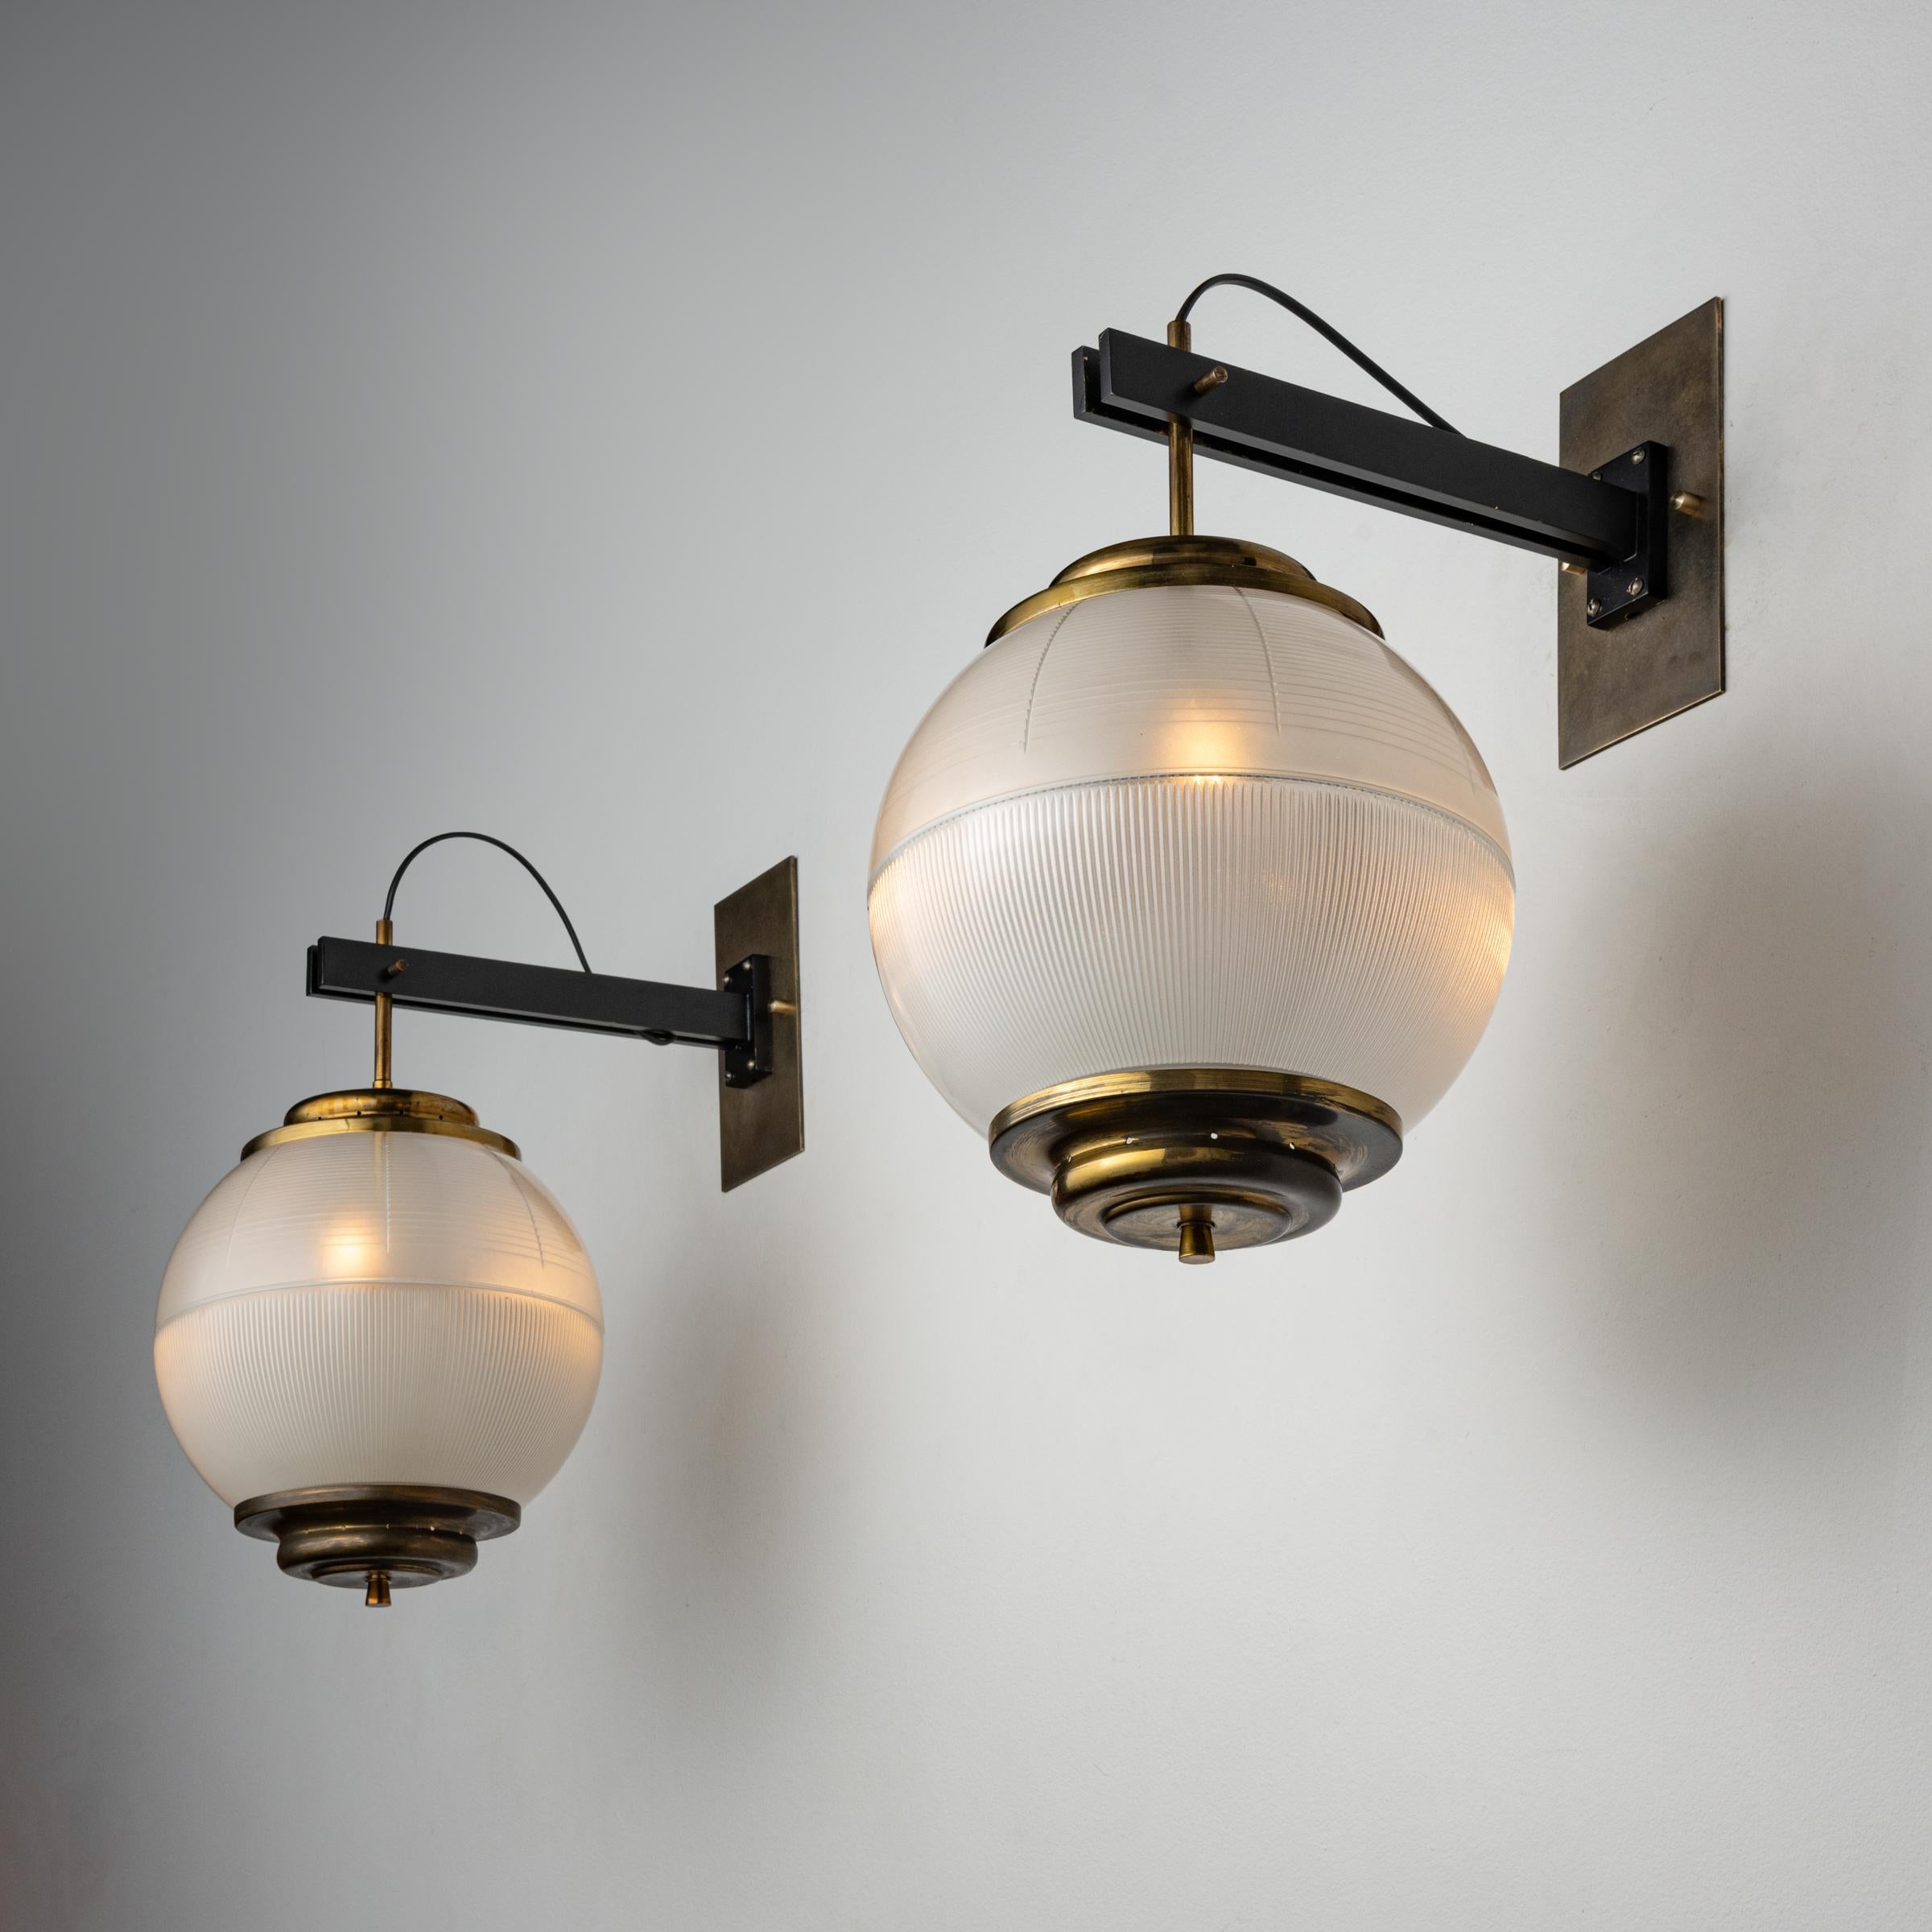 Six Model A/567 wall lights by Chiaravallotti. Manufactured in Italy, circa 1950's. Holophane glass, brass, custom brass backplates. We recommend three e14 25w maximum bulbs per fixture. Bulbs not included. Priced and sold individually, not as pairs